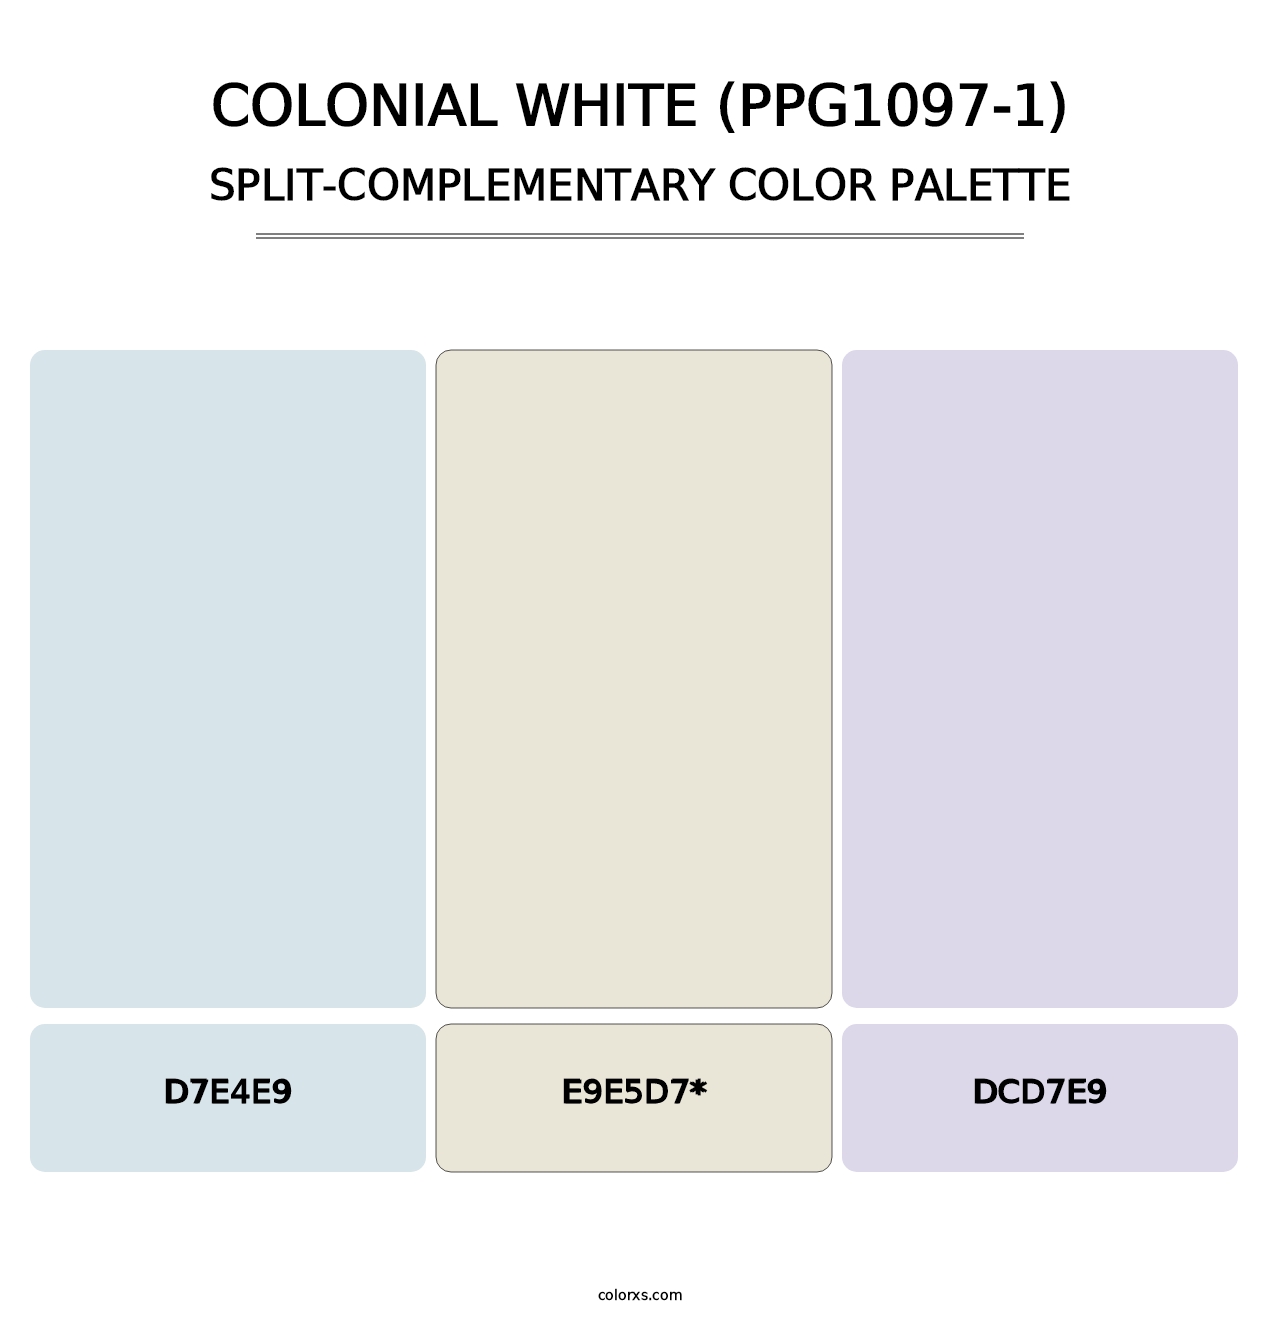 Colonial White (PPG1097-1) - Split-Complementary Color Palette